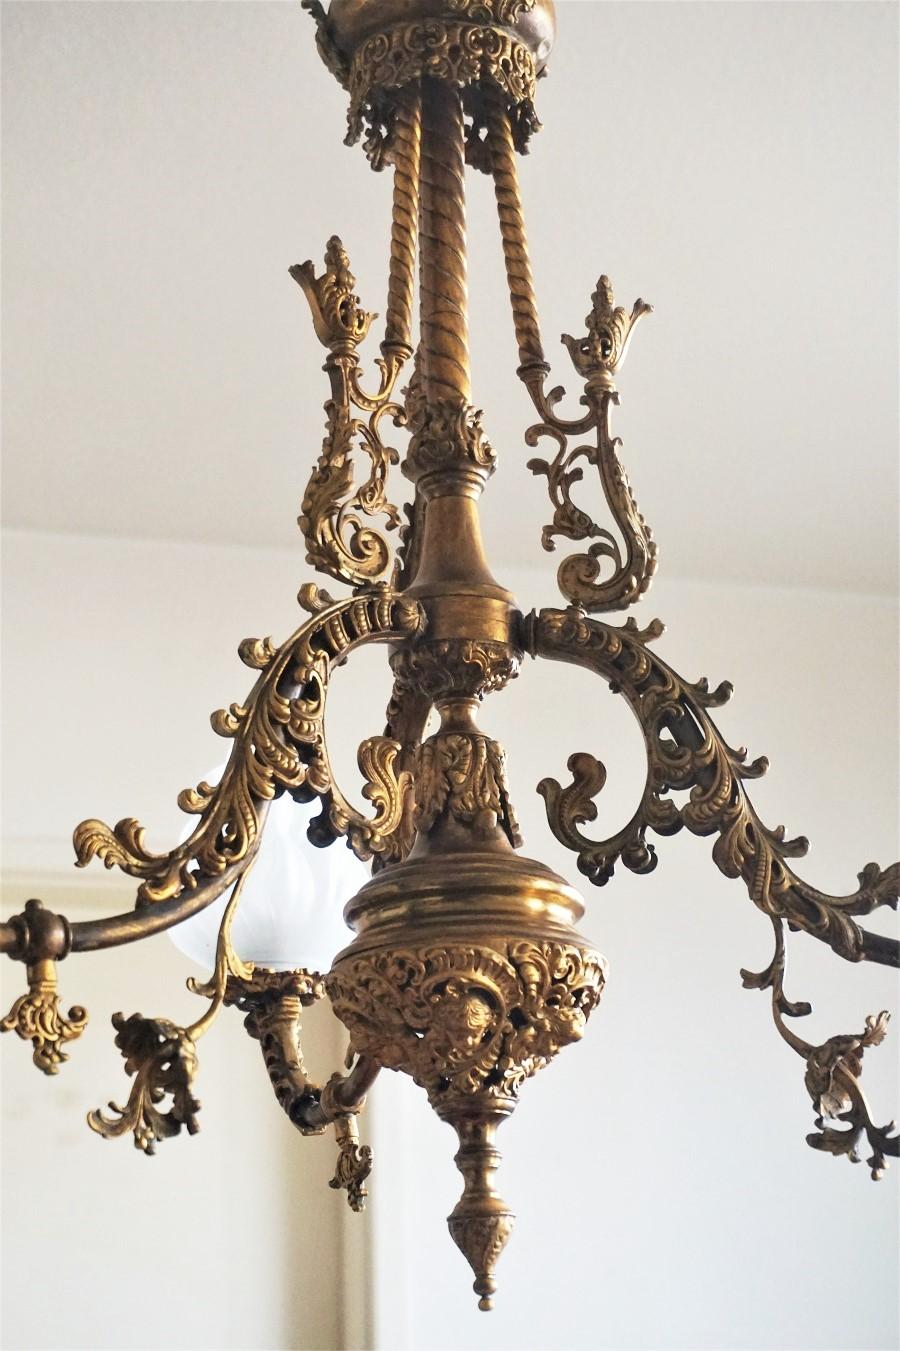 Fine 18th Century French Louis XVI Style Fire-Gilded Bronze Electried Chandelier For Sale 2